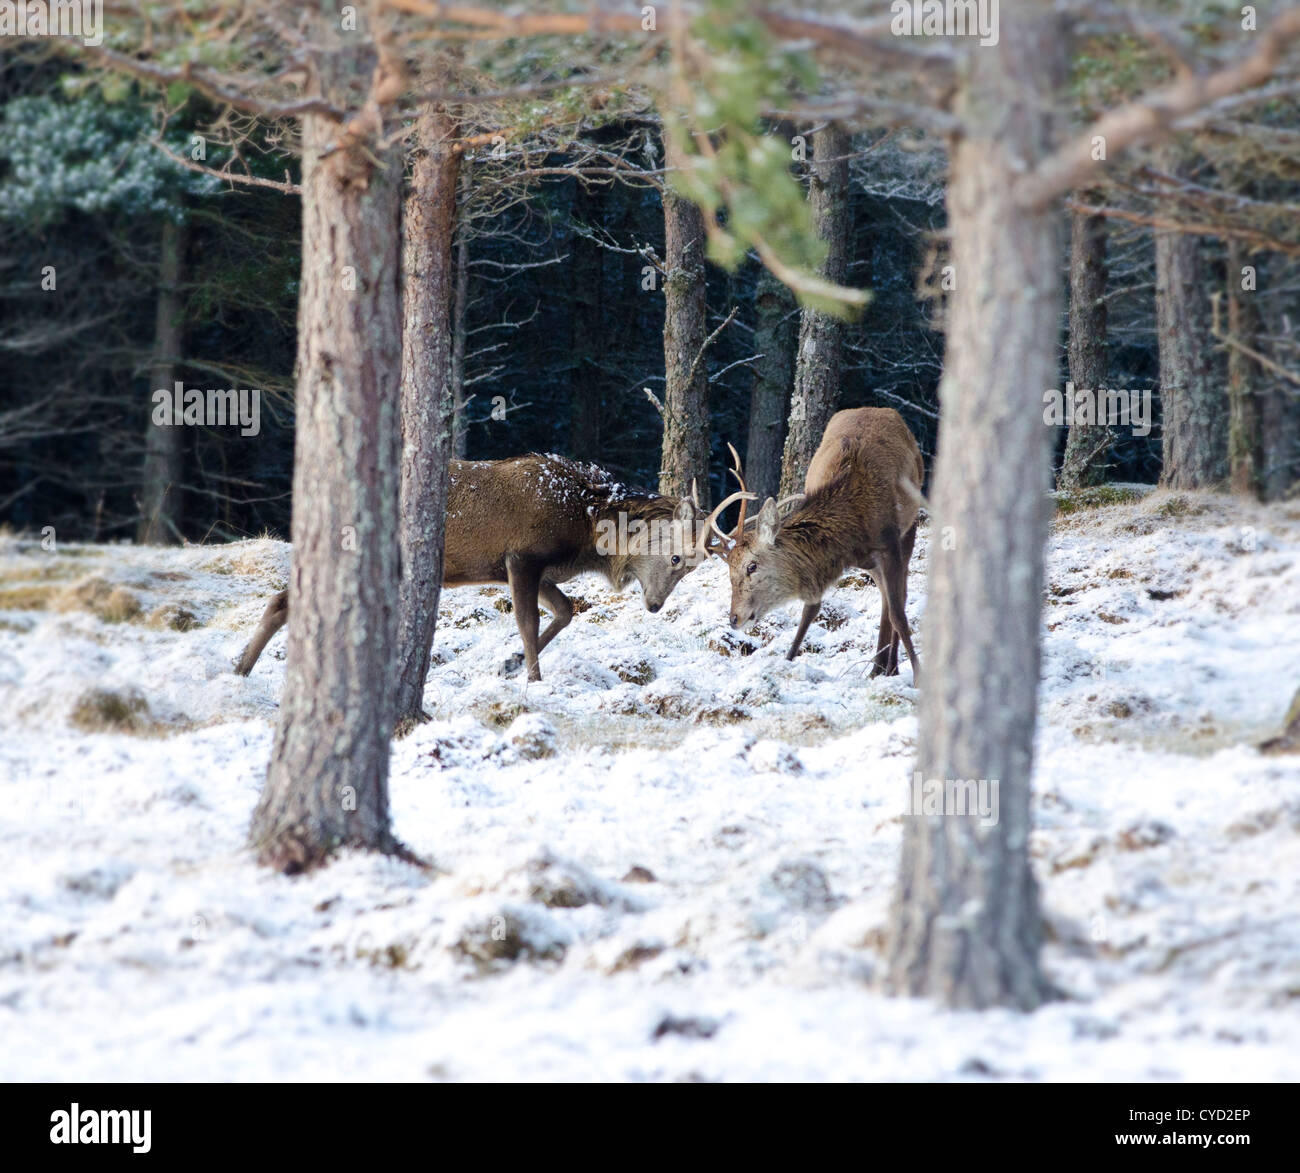 The last days of the rutt in the Scottish highlands two red dear stags go head to head in the snow covered hills Stock Photo